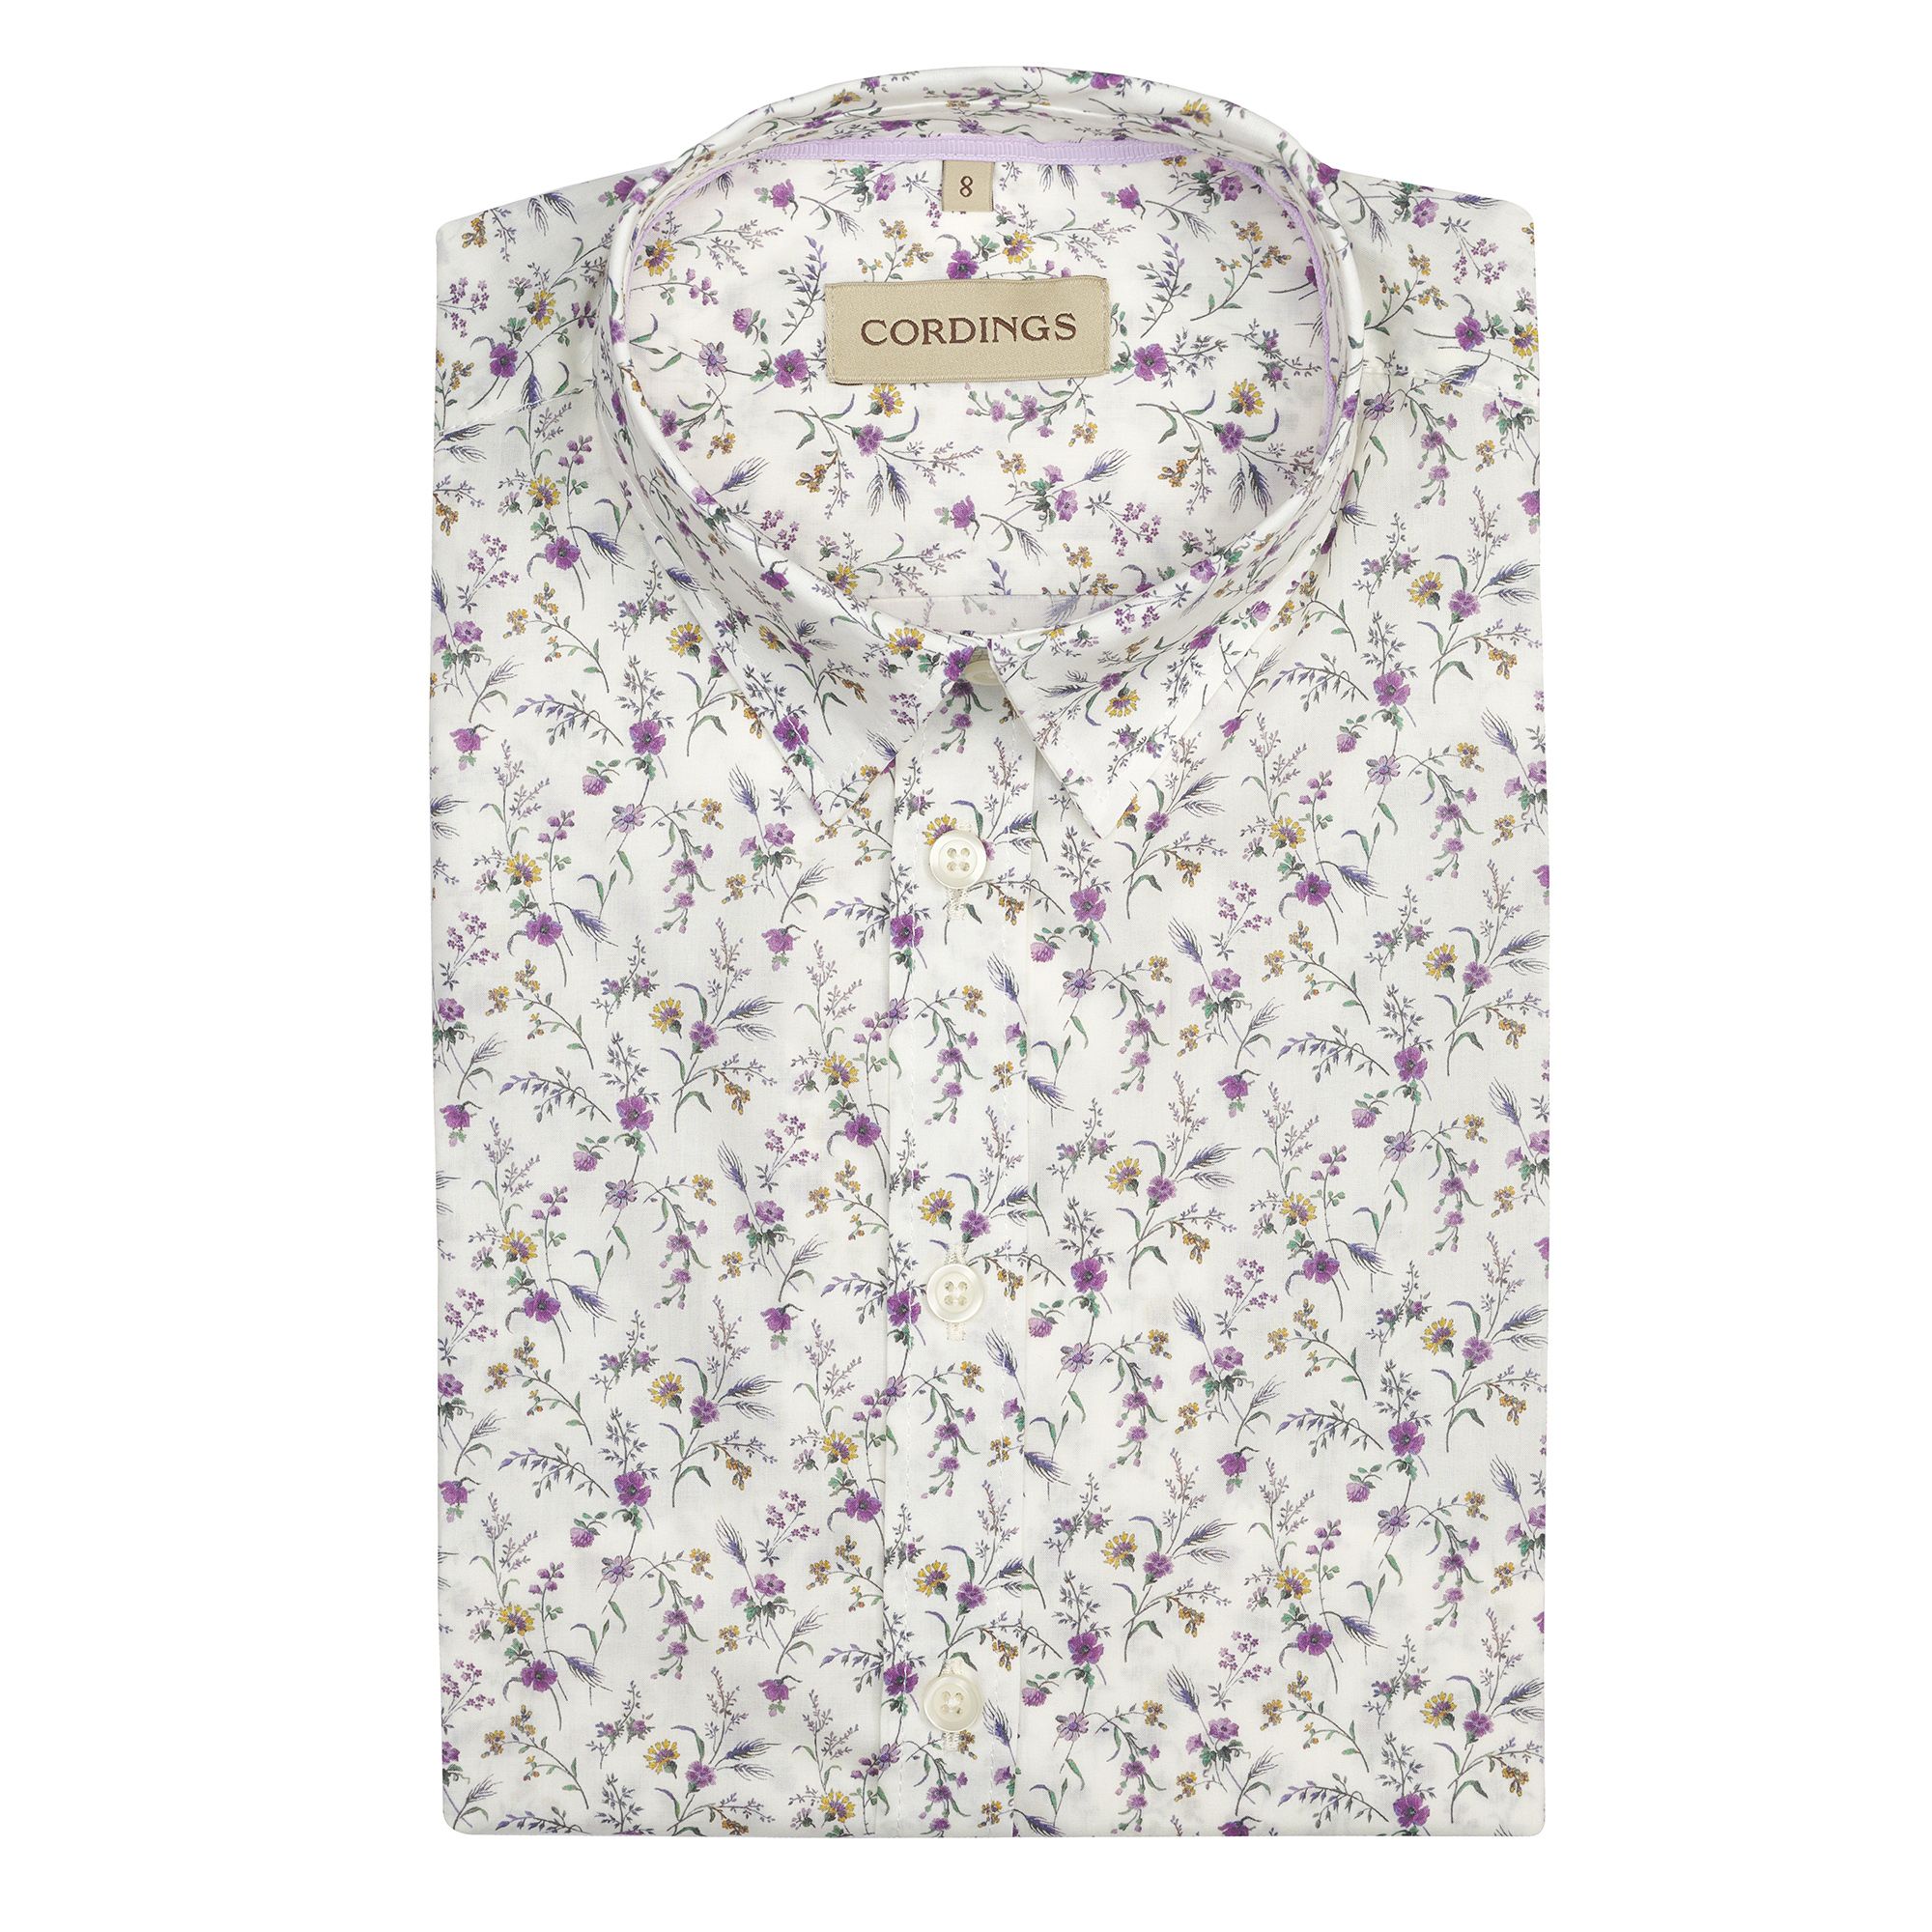 Emma Victoria Shirt Made With Tana Lawn™ | Ladies Country Clothing ...